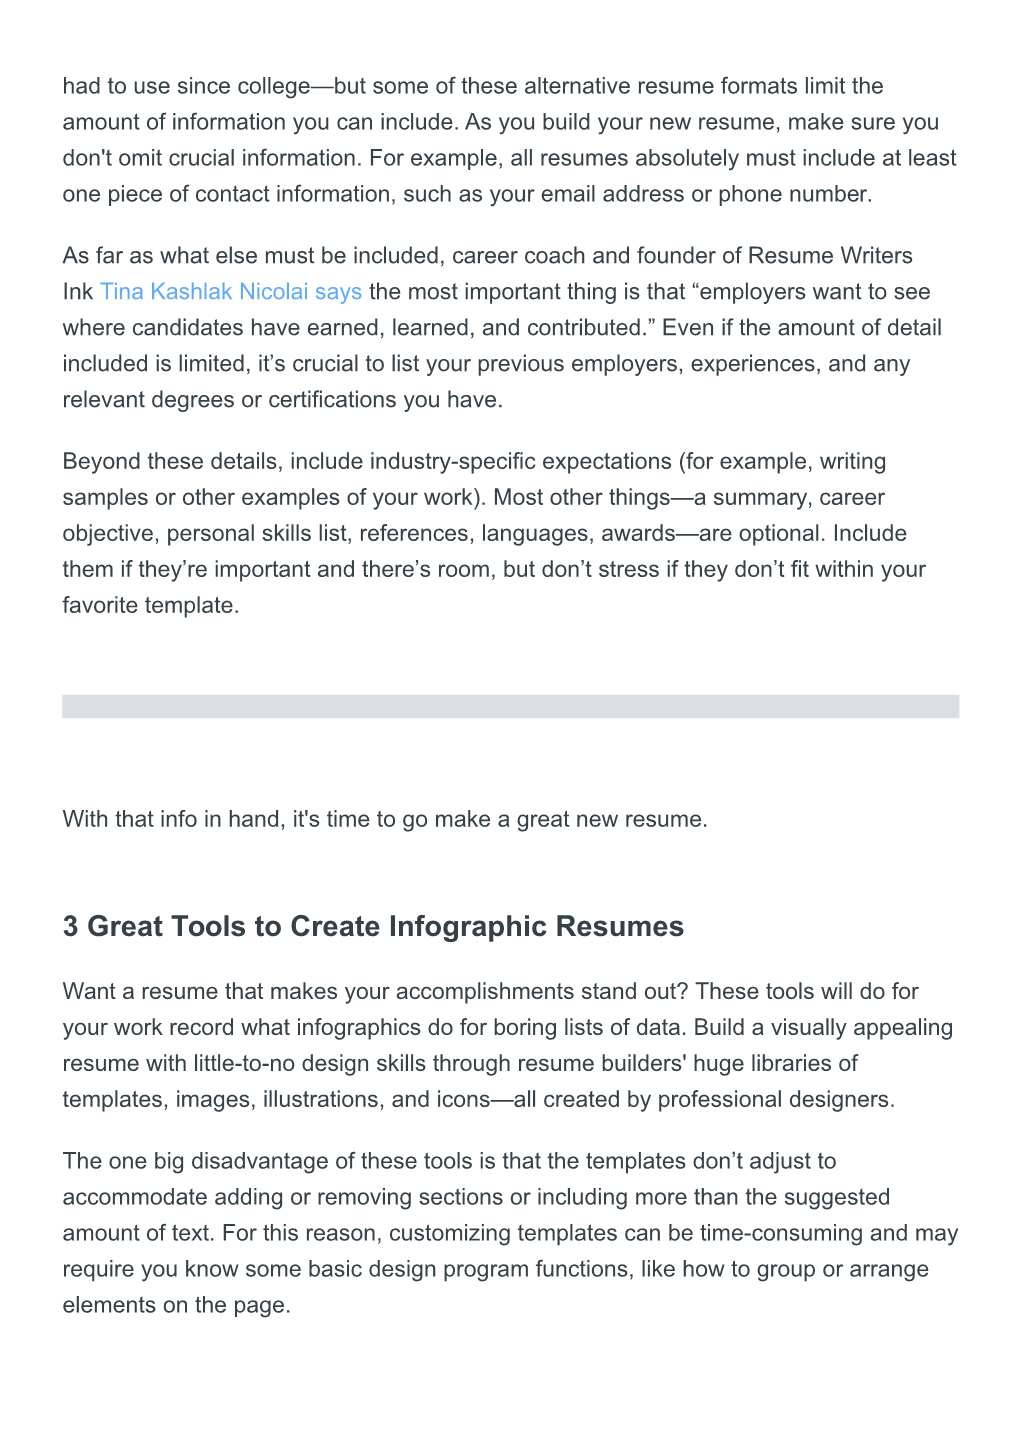 Make Your Job Application Stand out with These 12 Resume-Building Tools